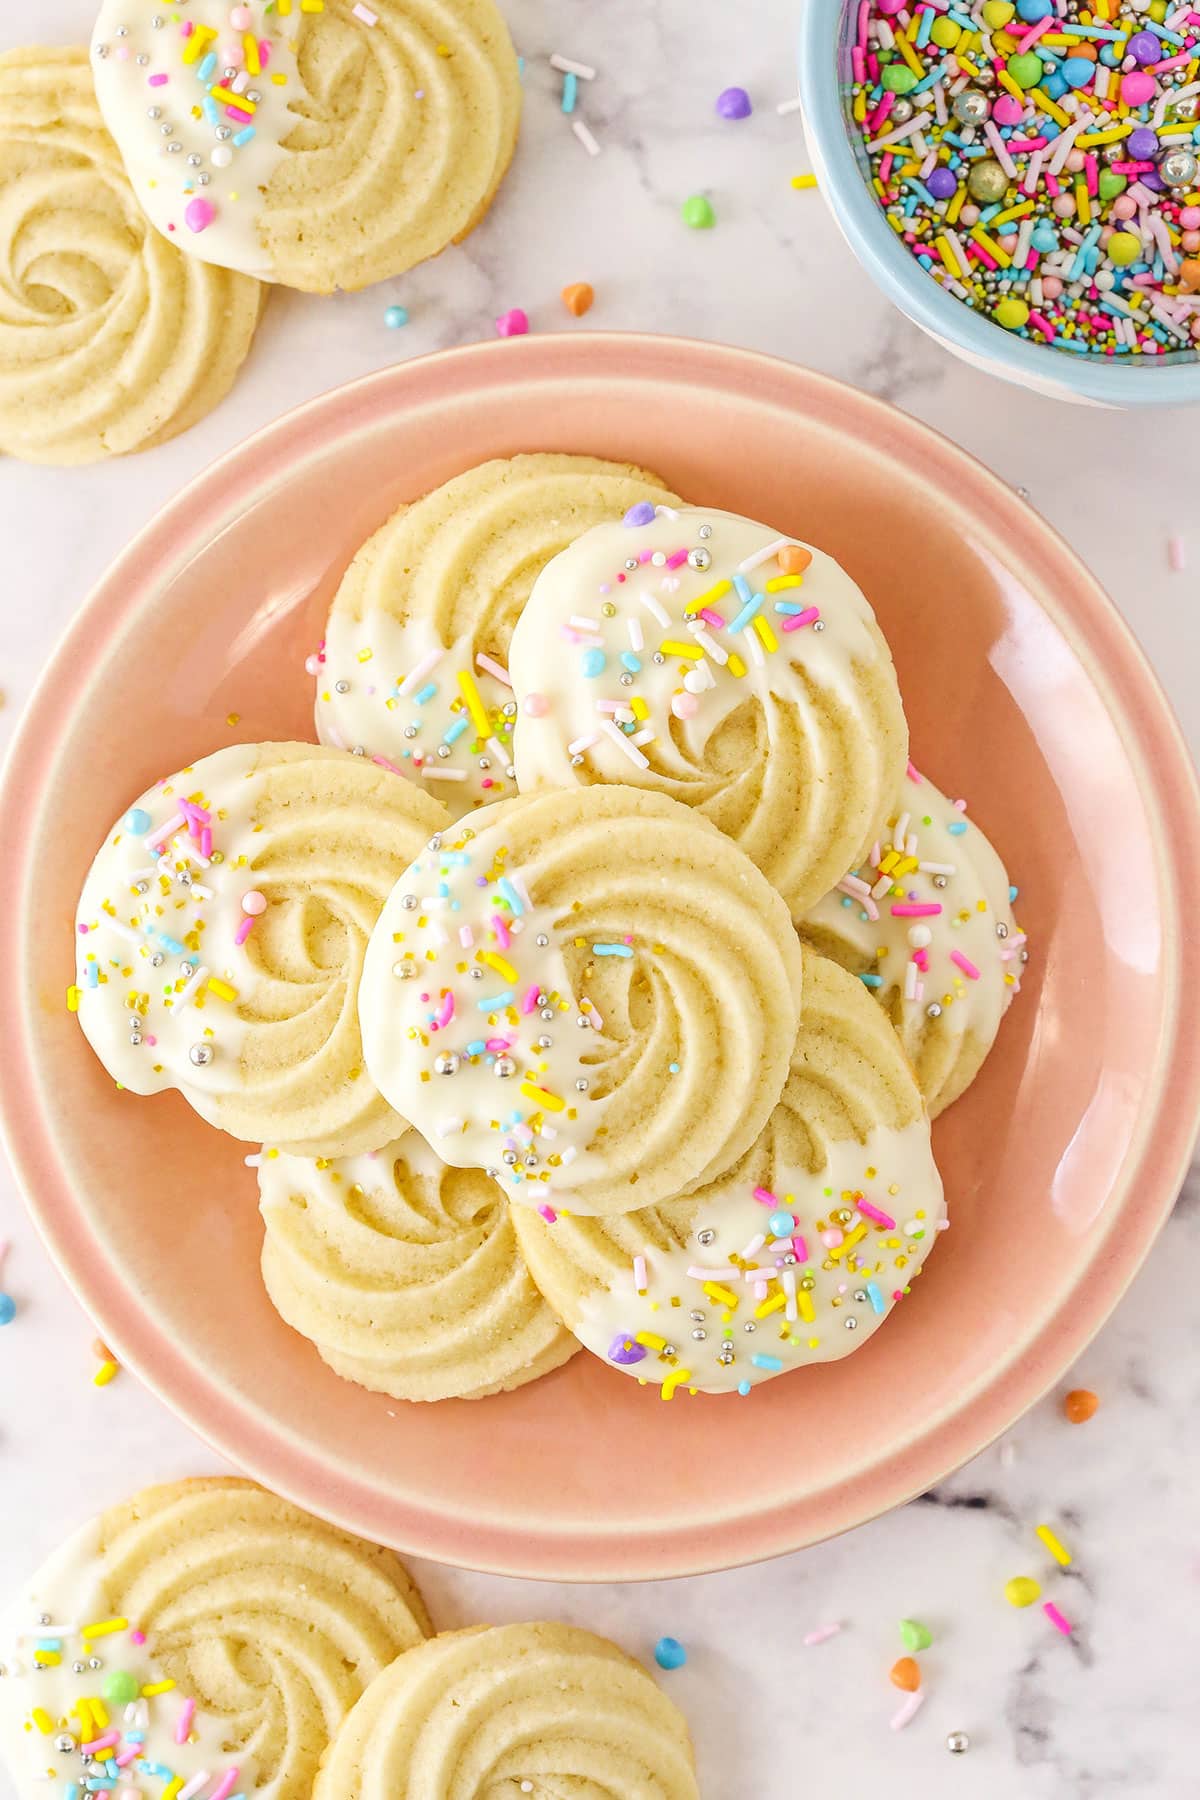 White chocolate butter cookies on a pale pink plate beside a bowl of pastel sprinkles.